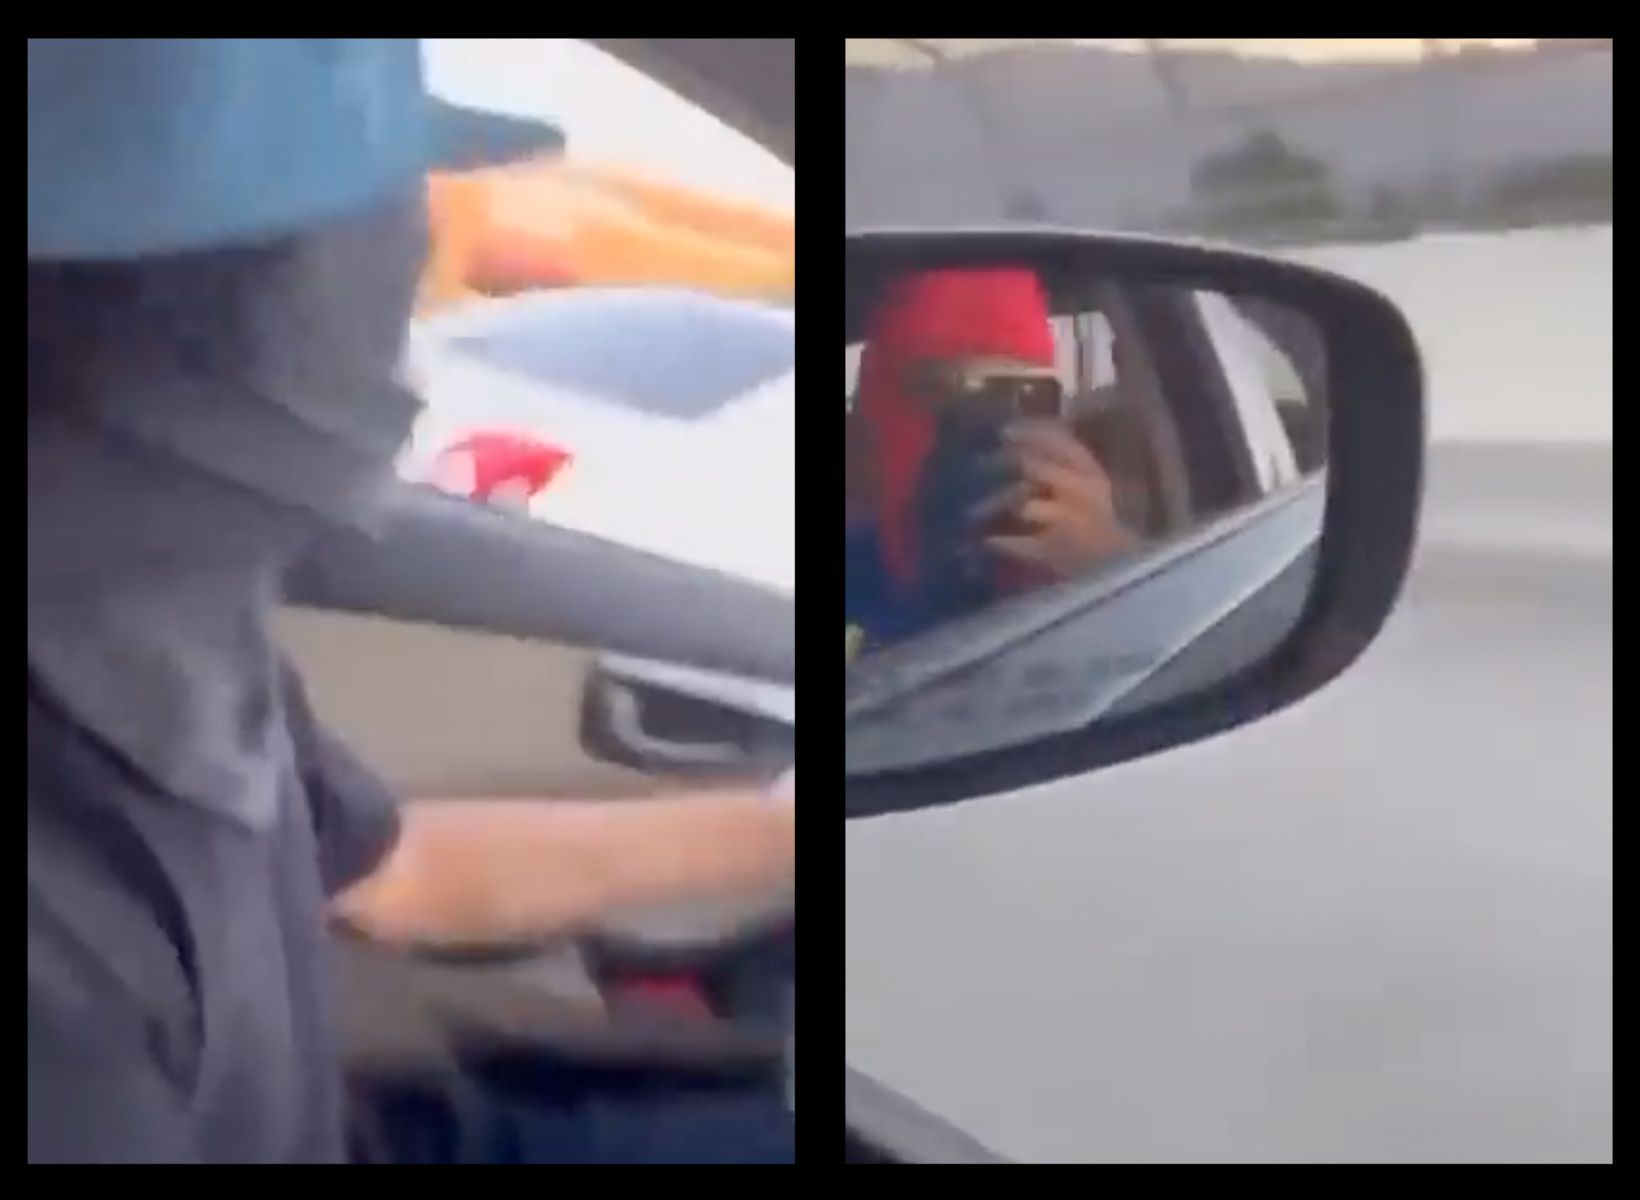 Images of driver in car intending to run over cyclist